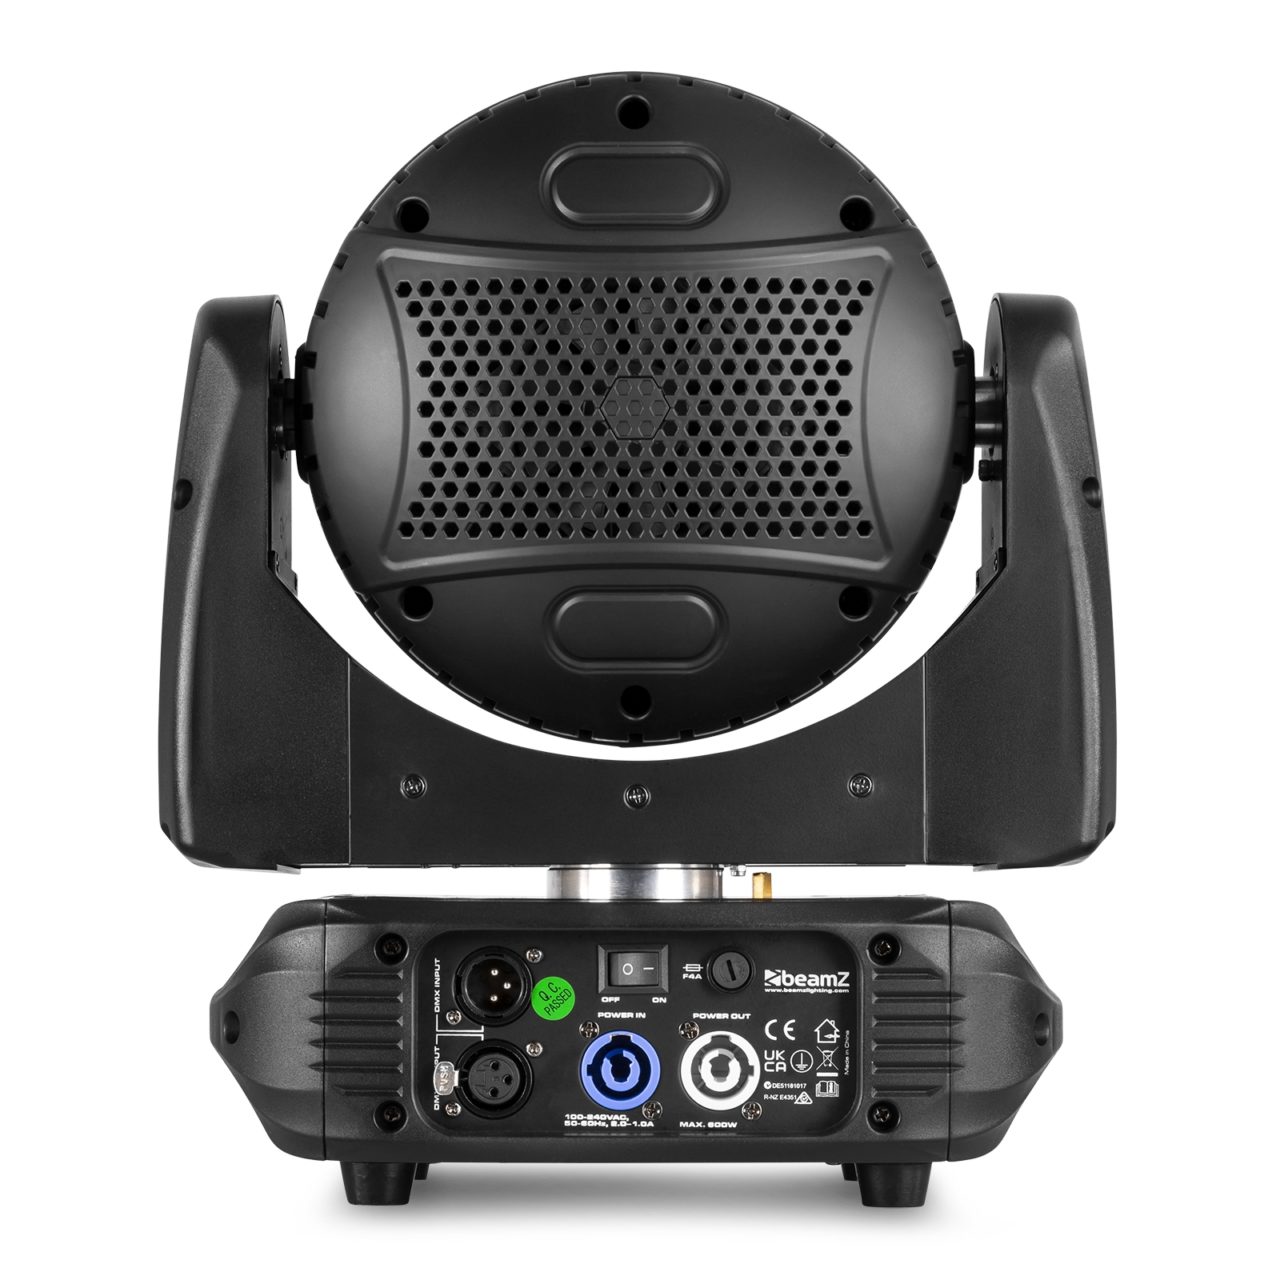 FUZE2812 WASH MOVING HEAD WITH ZOOM beamZ